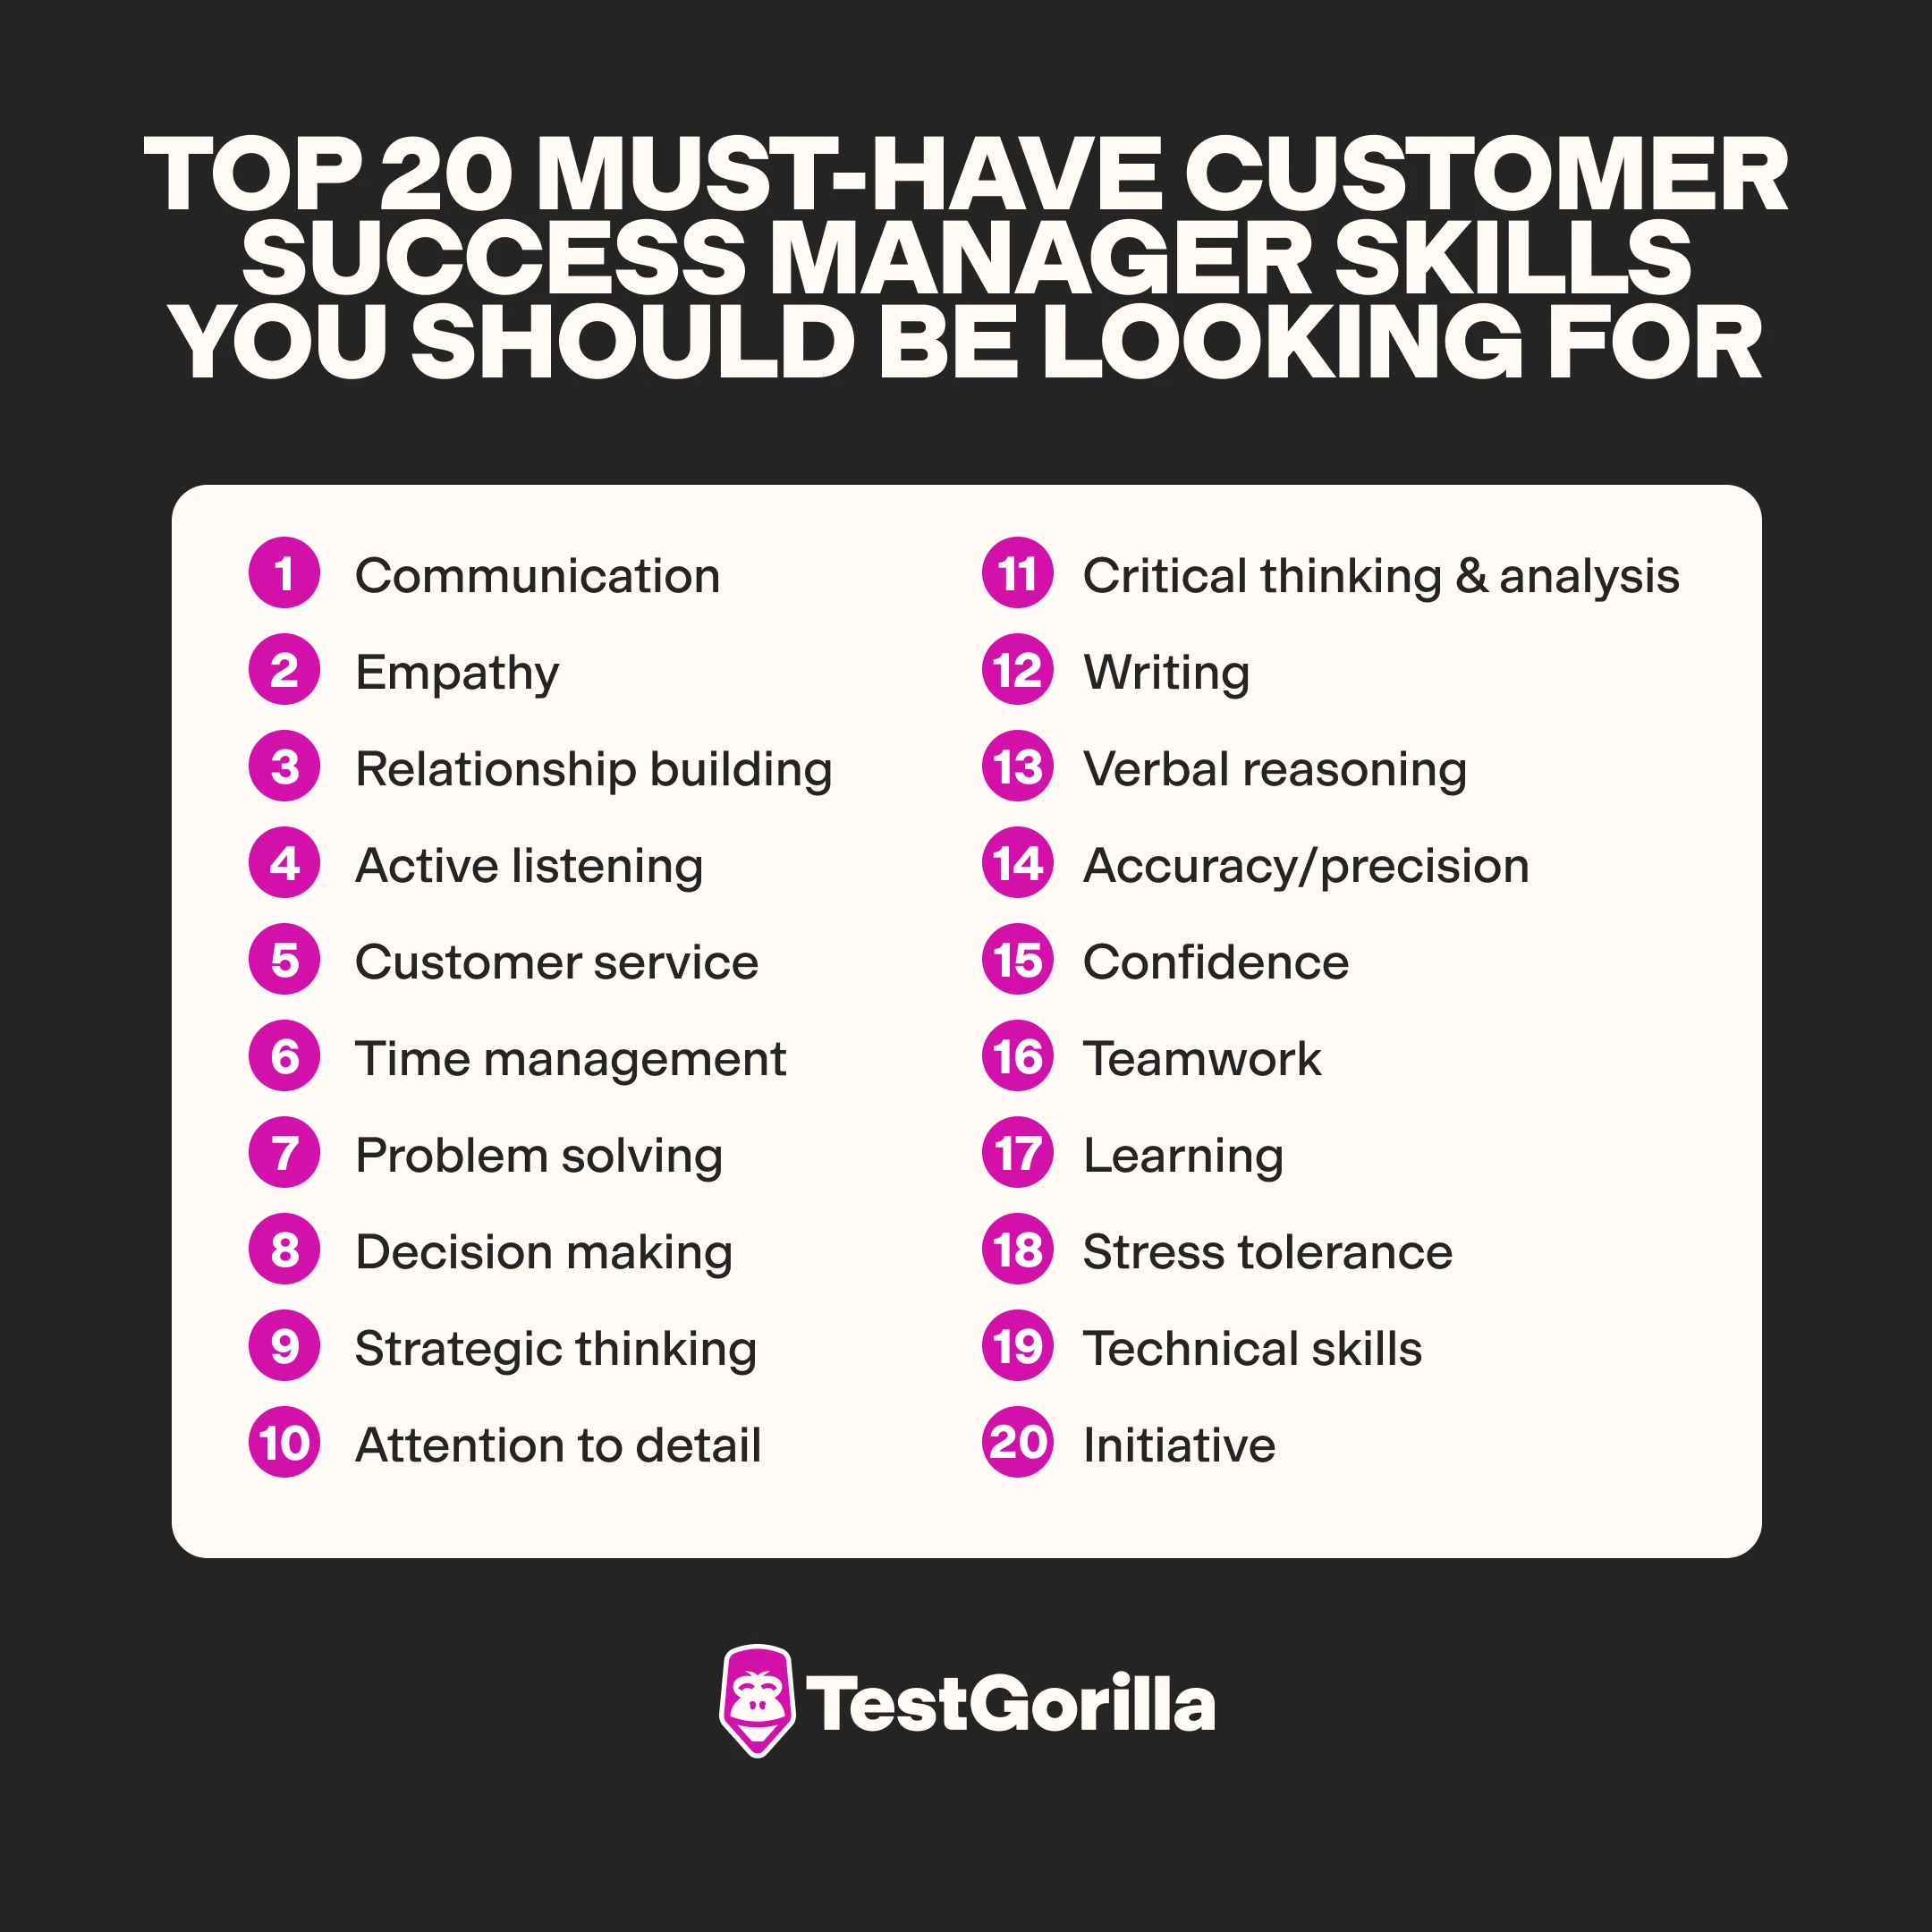 image listing the first 10 skills of the 20 must-have customer success management skills you should be looking for